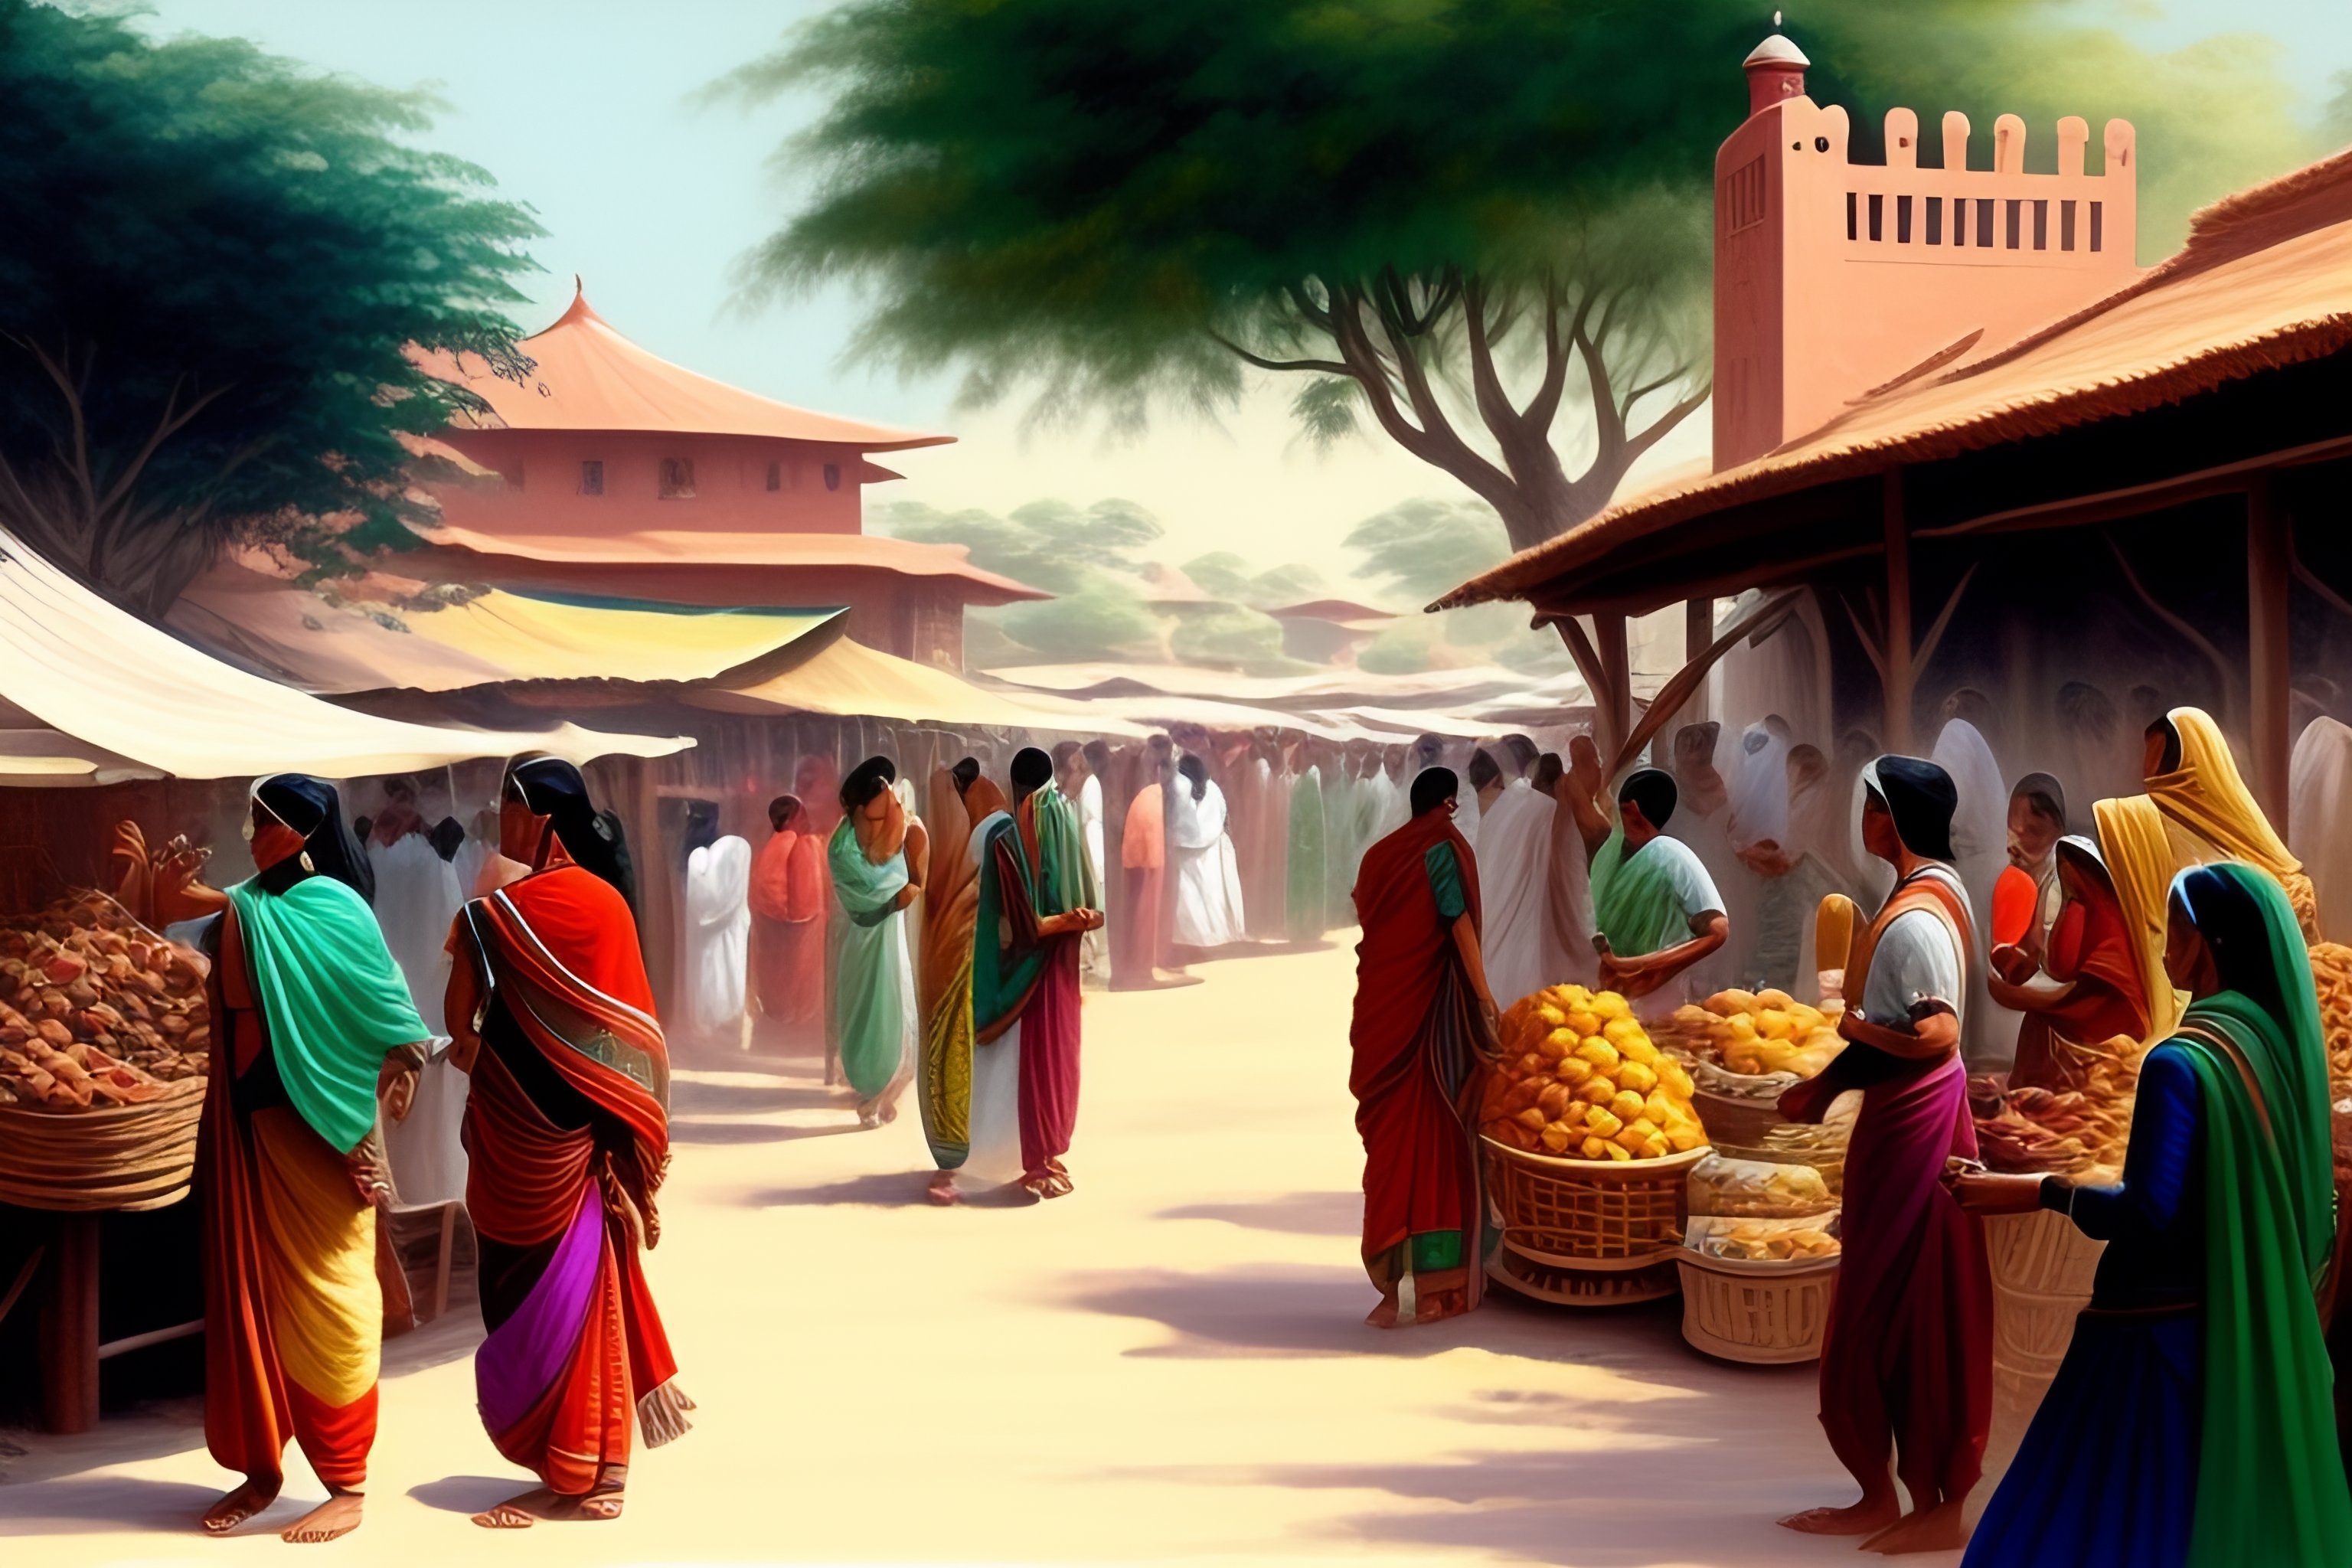 Lexica - Nandalal bose style sketch of a busy indian village market